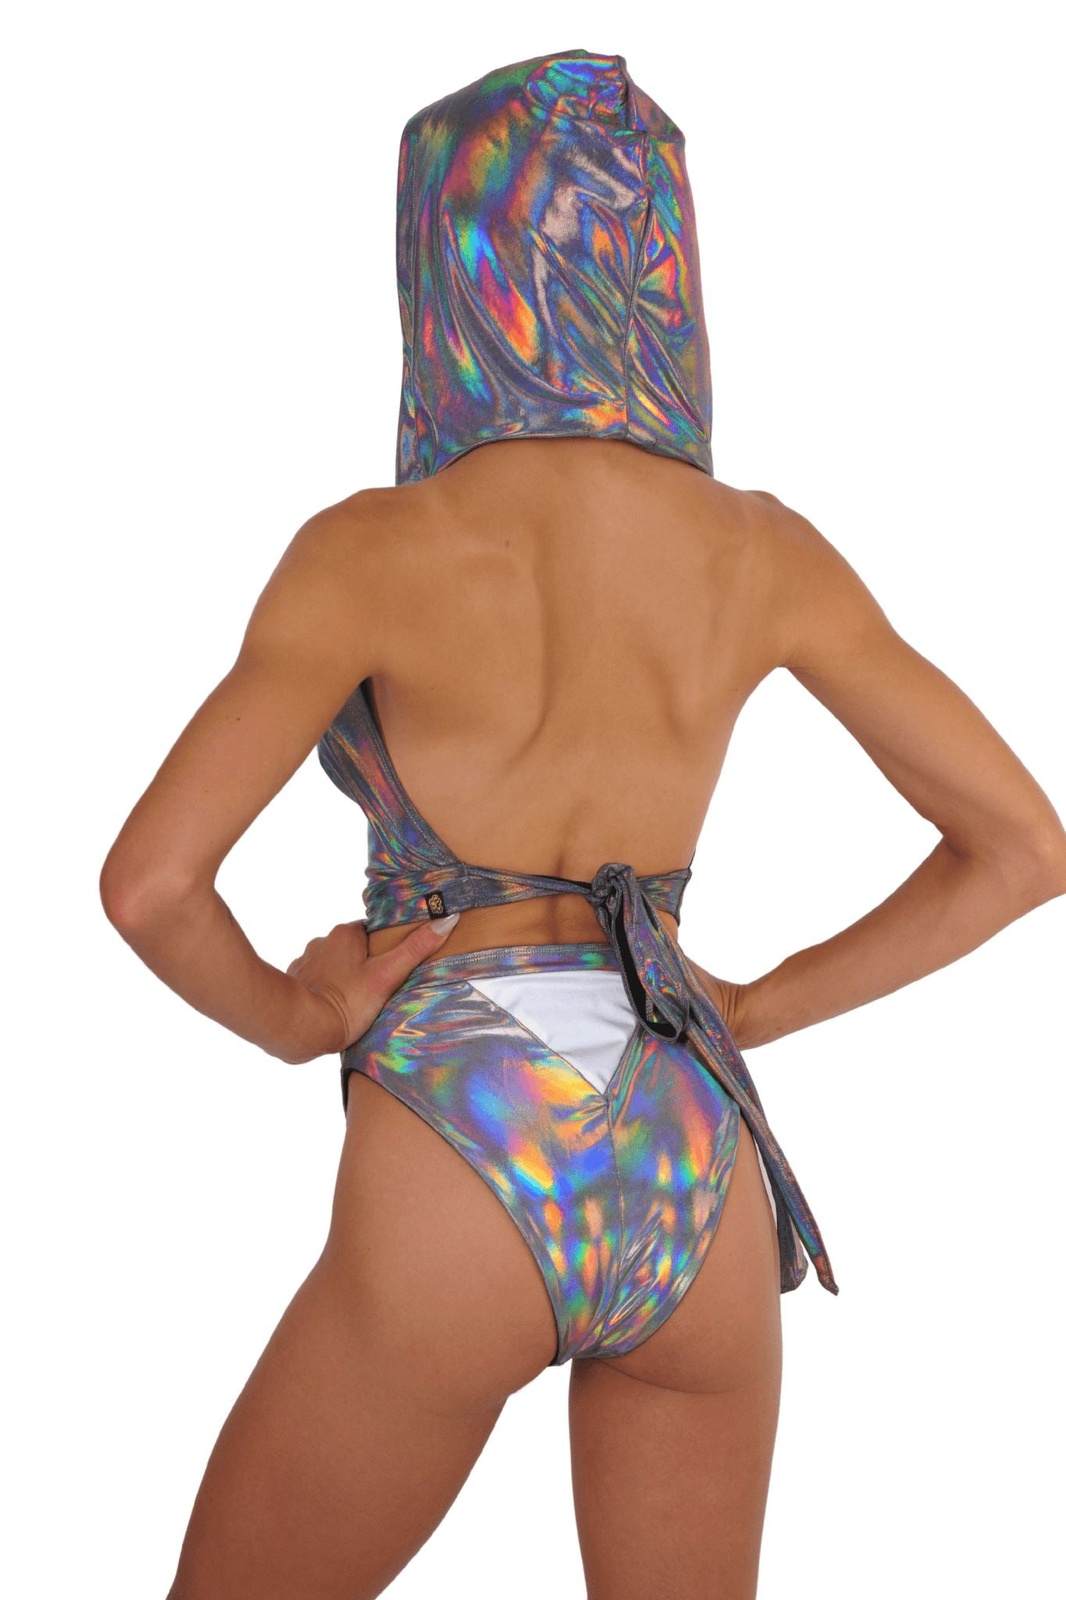 Layla Holographic Cowl Neck Crop Top Holographic Outfit from Love Khaos Rave Clothing Website